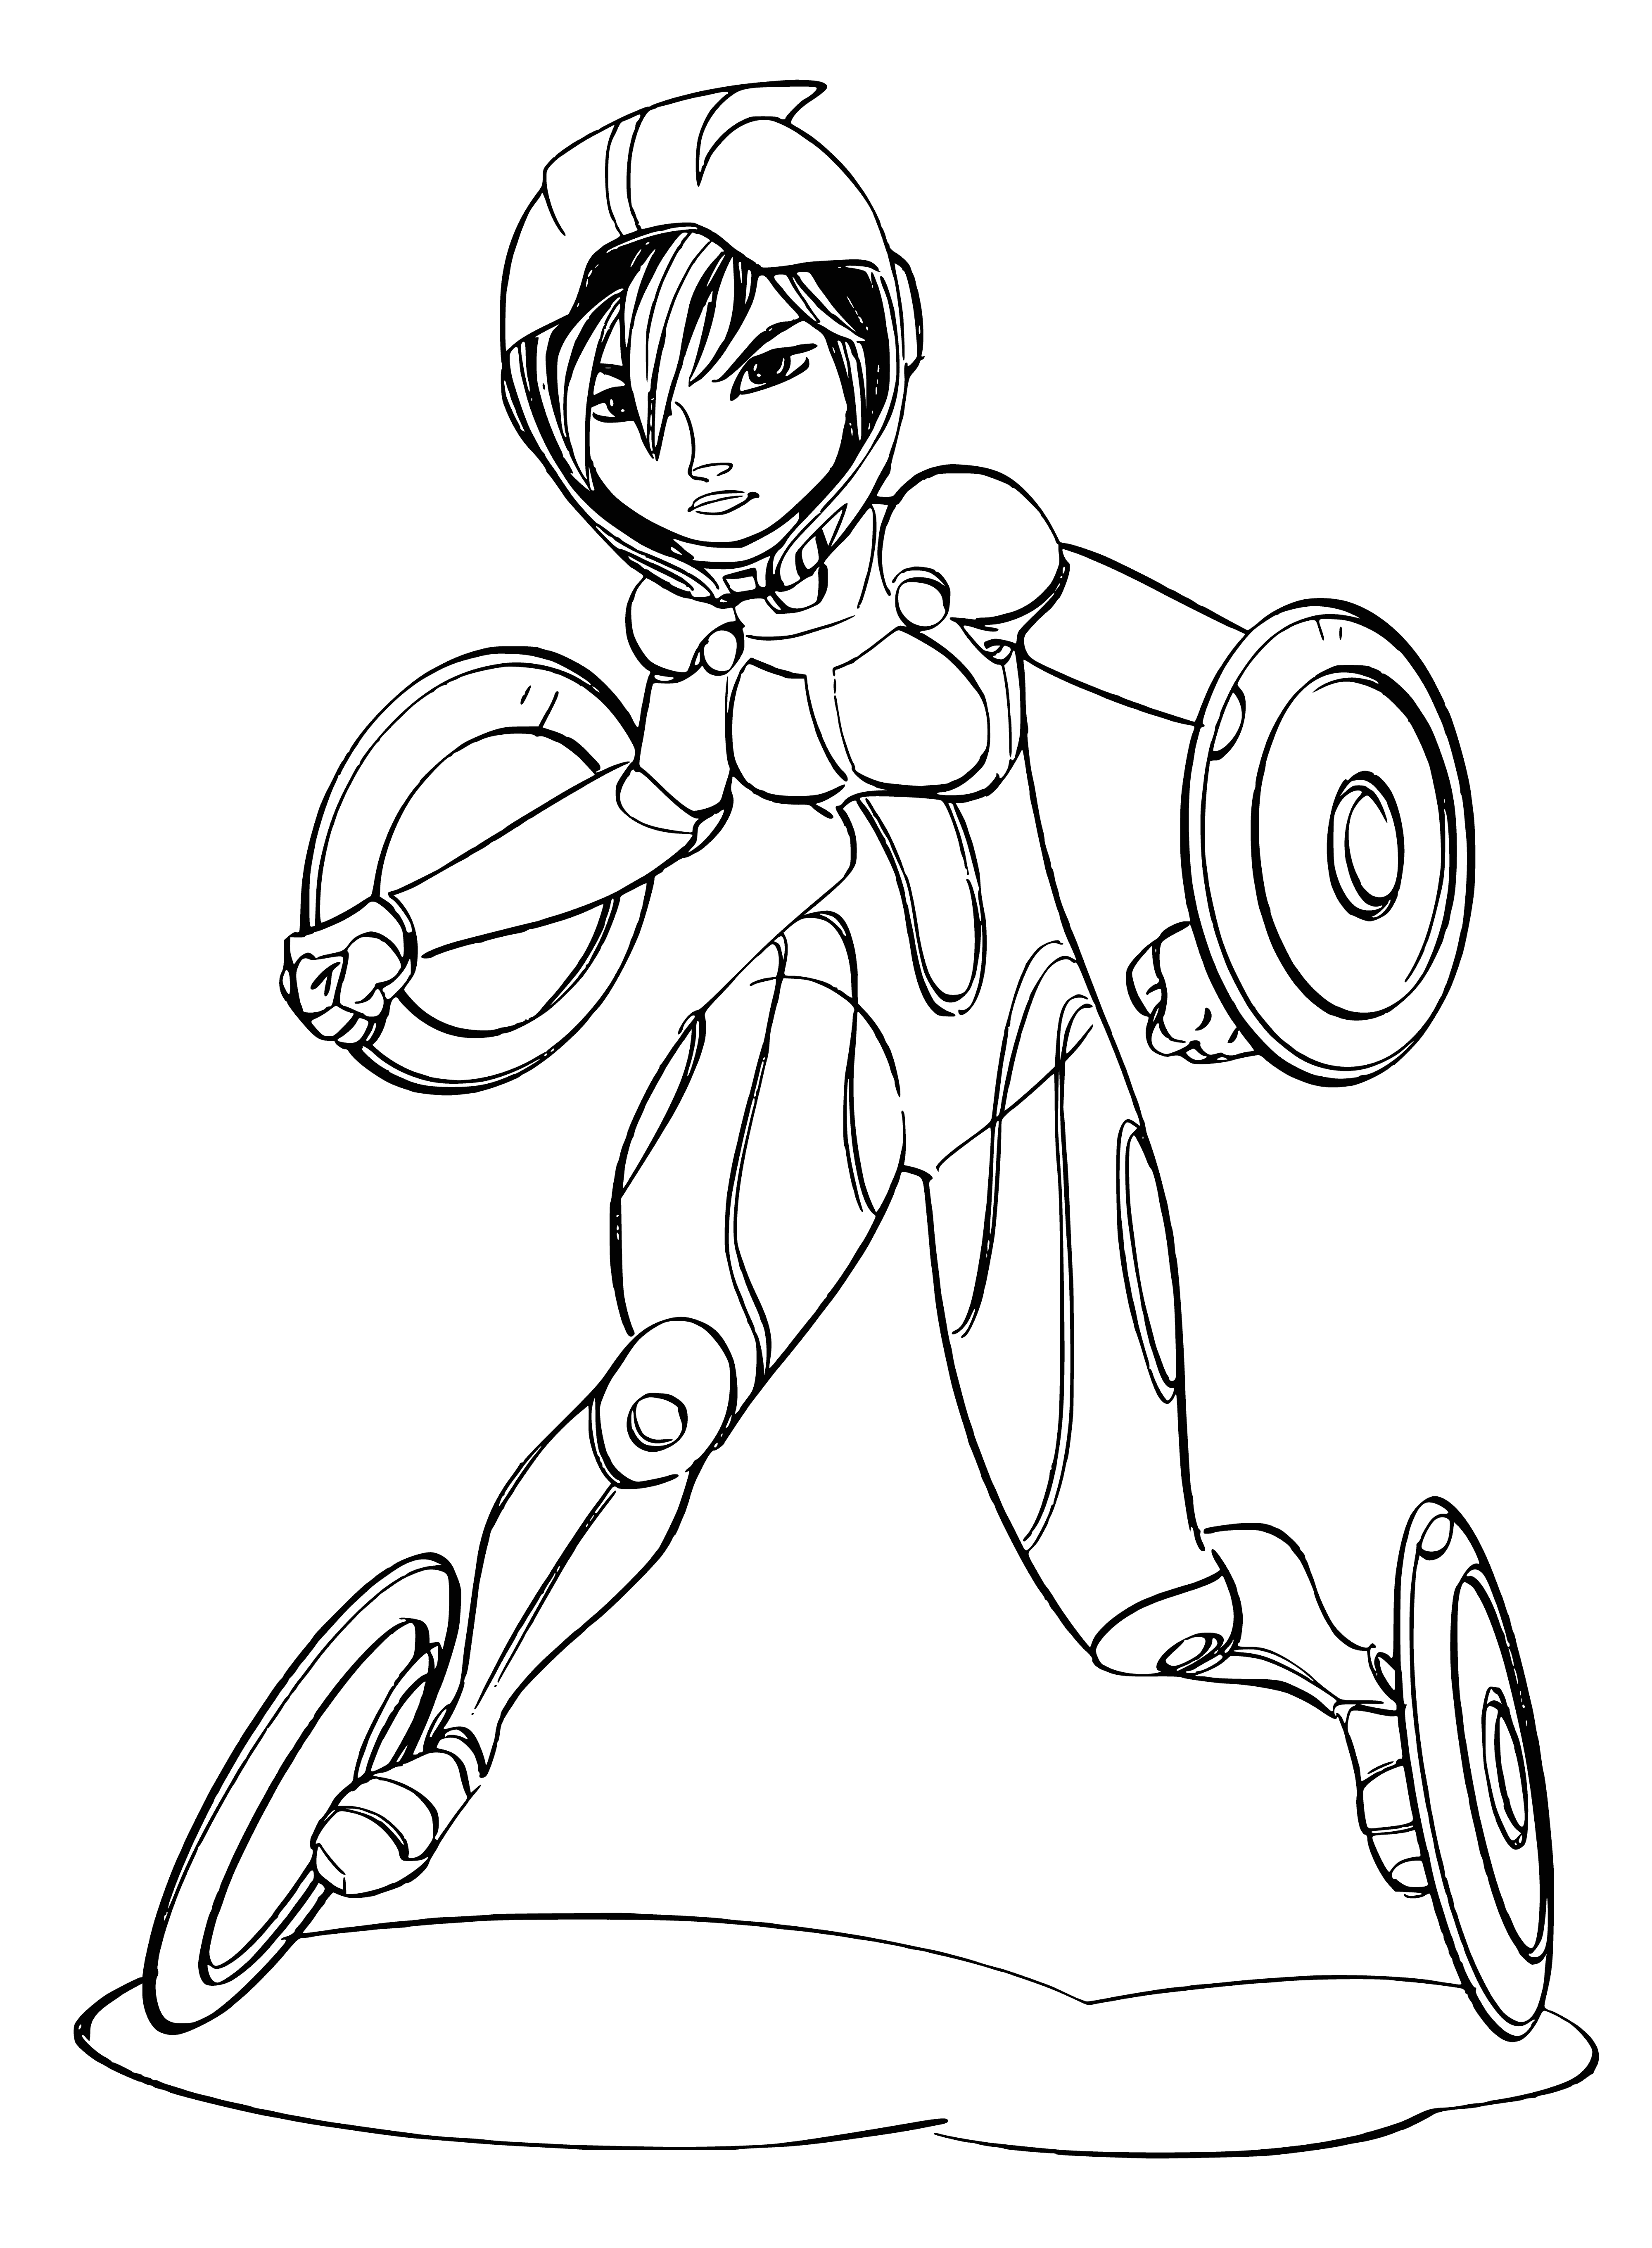 coloring page: Girl in red and orange suit flying with big black gloves and boots. #coloringpage #actionhero